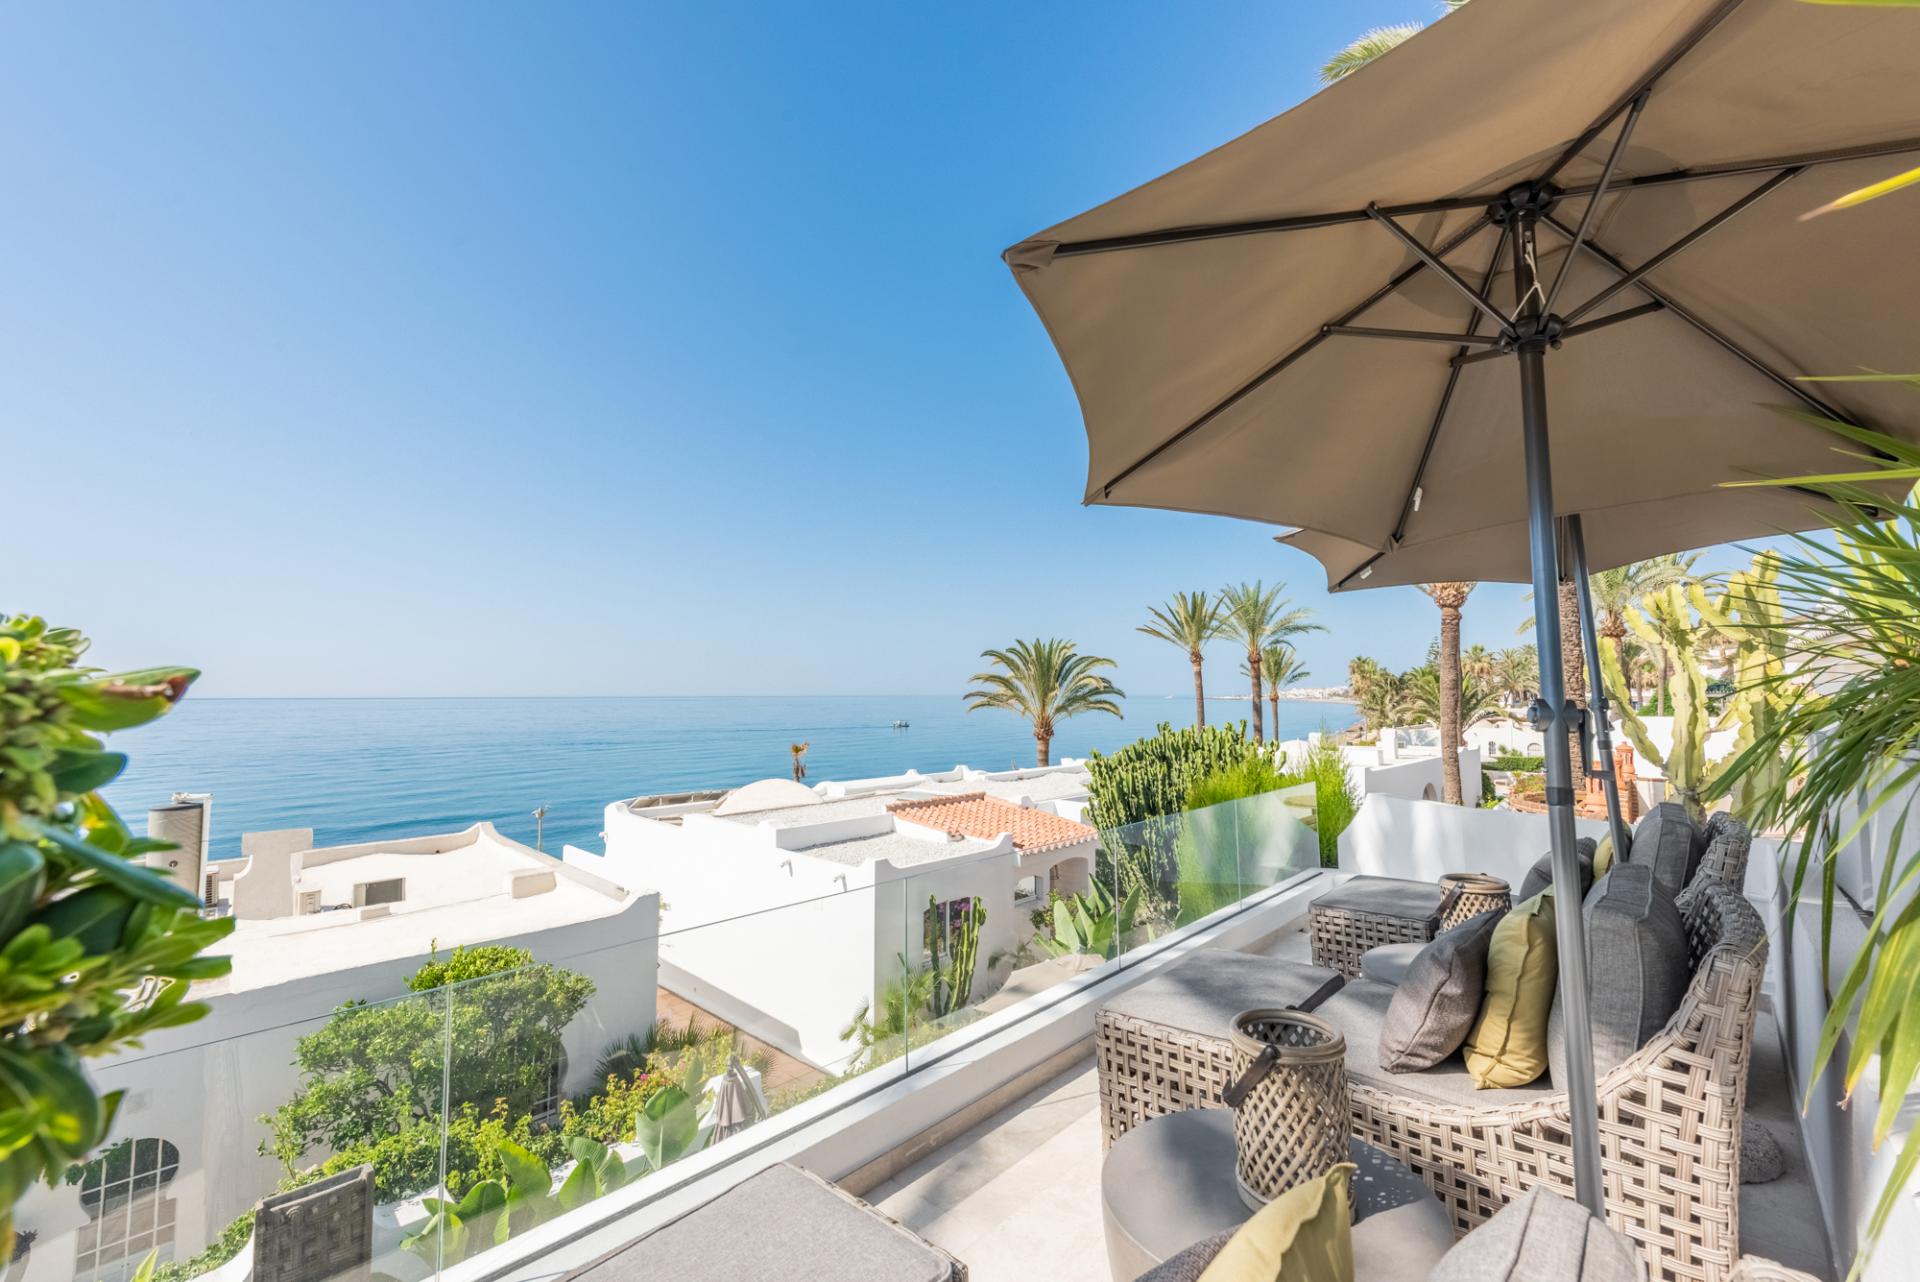 Scandi-style design bungalow in the beachfront Oasis Club on Marbella's Golden Mile.